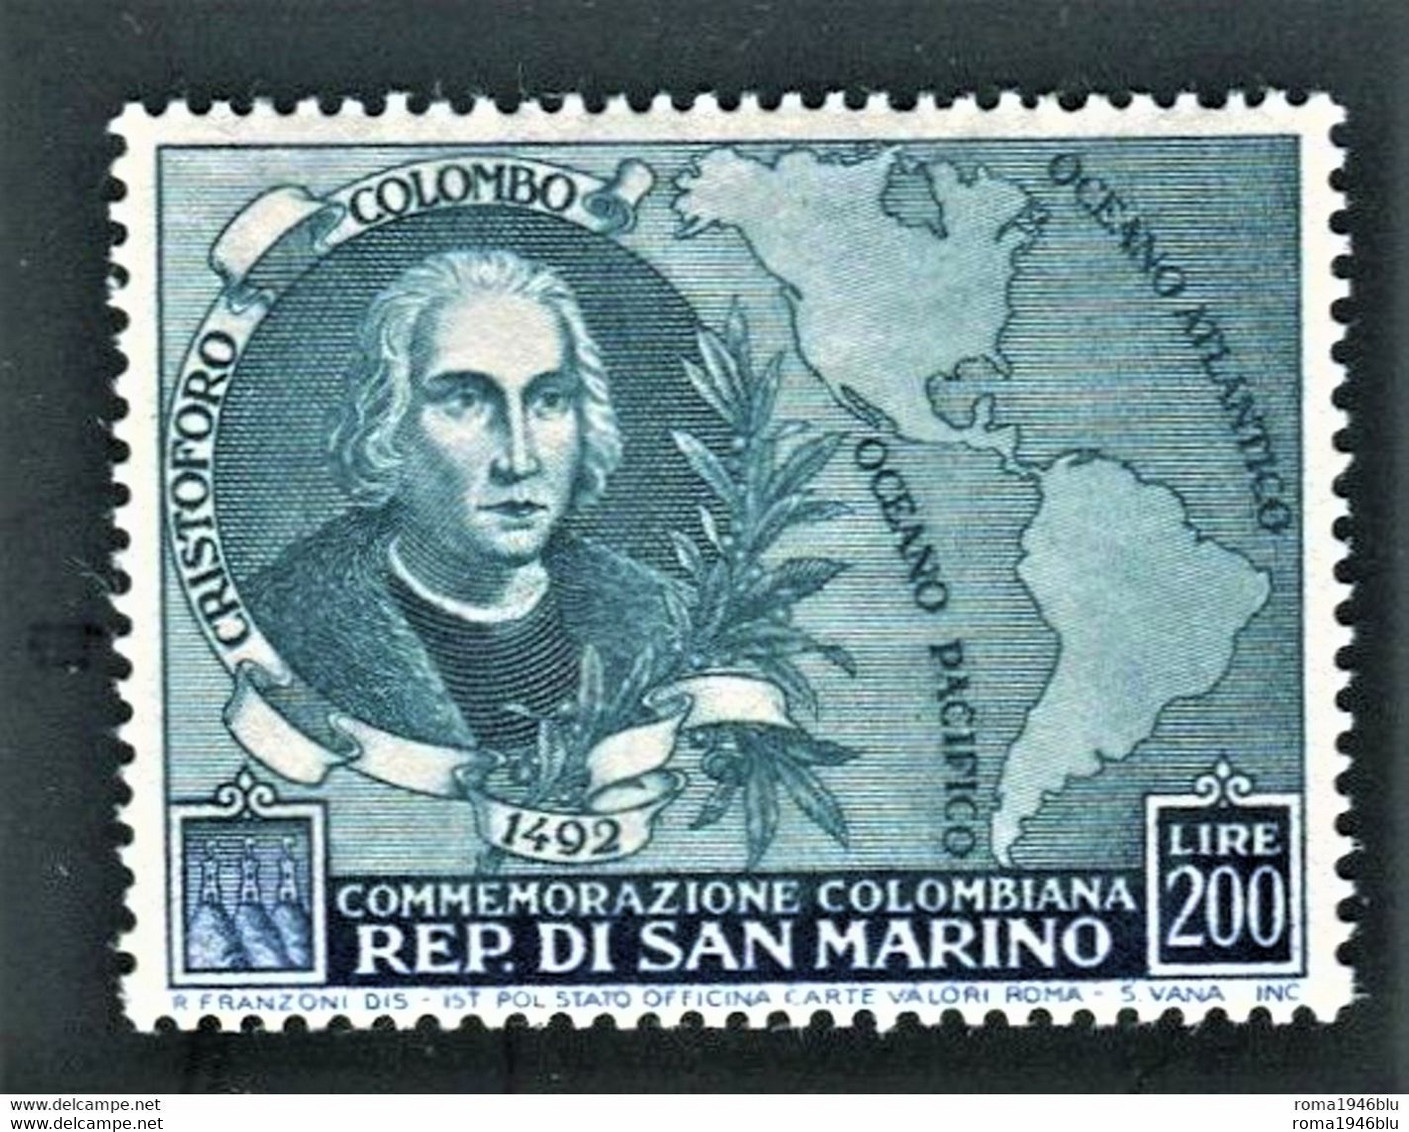 SAN MARINO 1952 COLOMBO 200 L. ** MNH CENTRATO - Unused Stamps